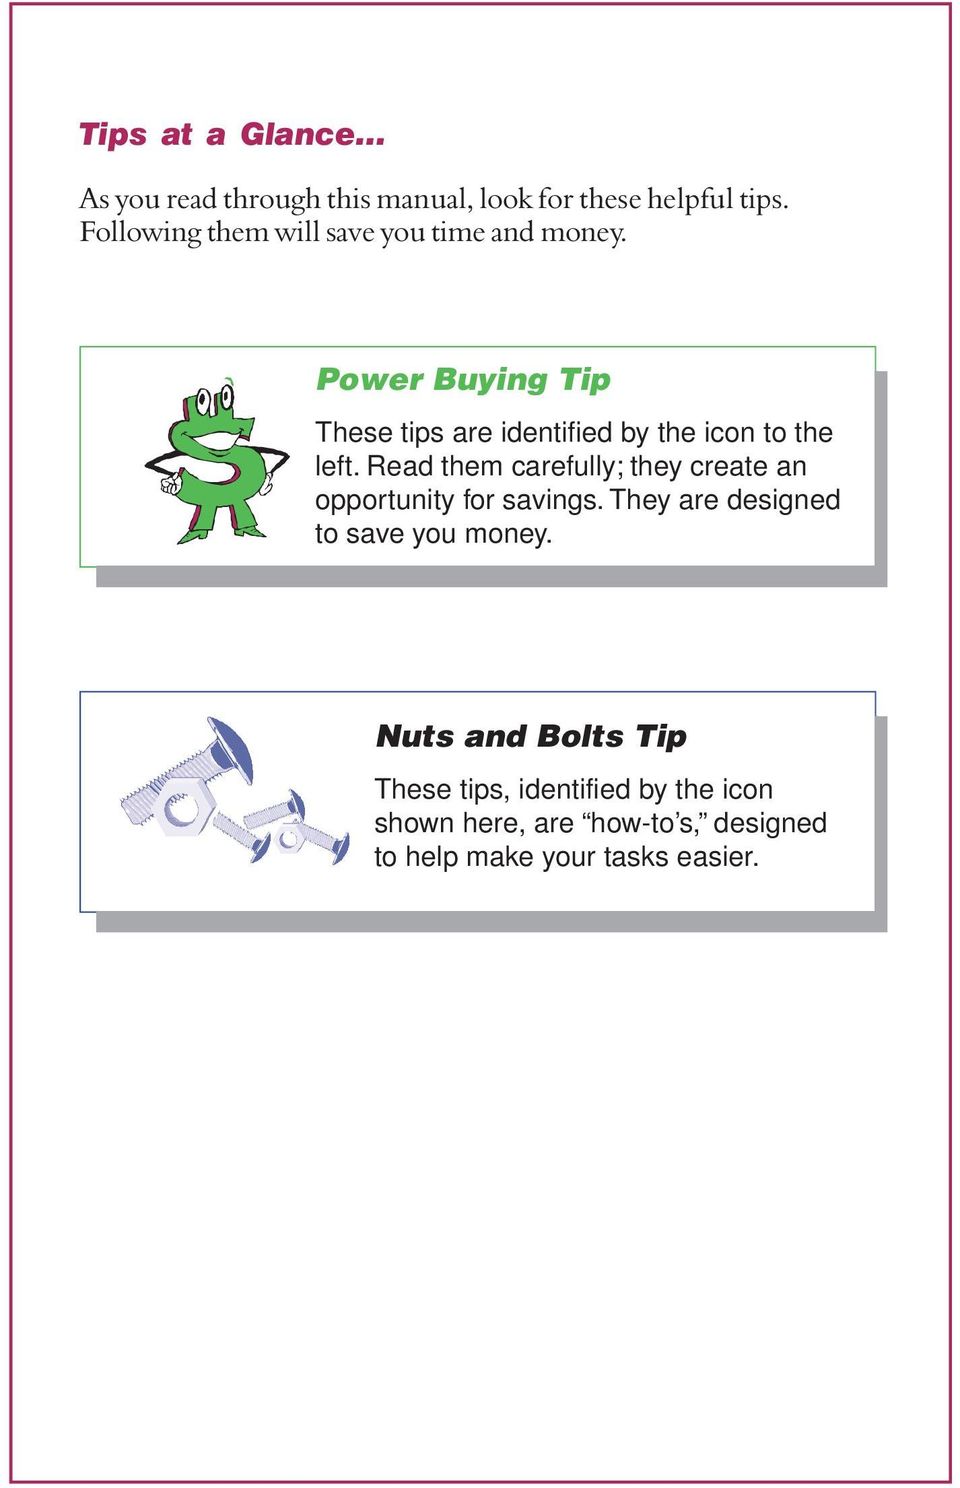 Power Buying Tip These tips are identified by the icon to the left.